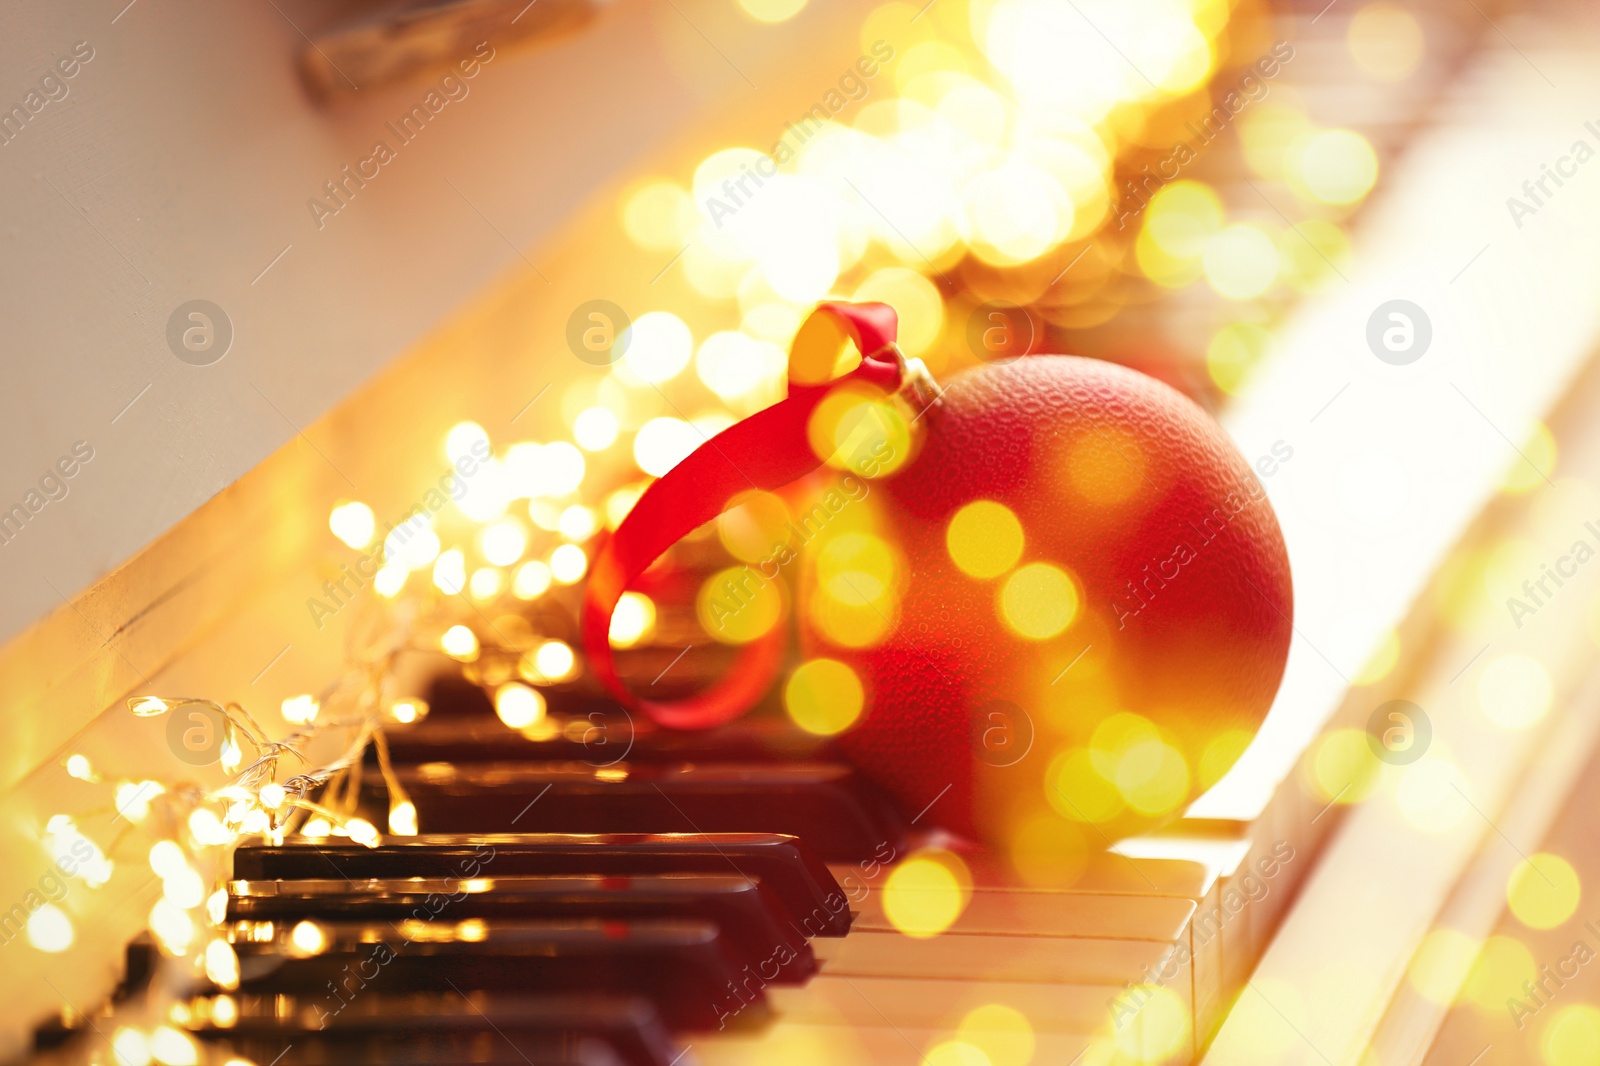 Image of Christmas and New Year music. Piano with fairy lights and festive ball, bokeh effect